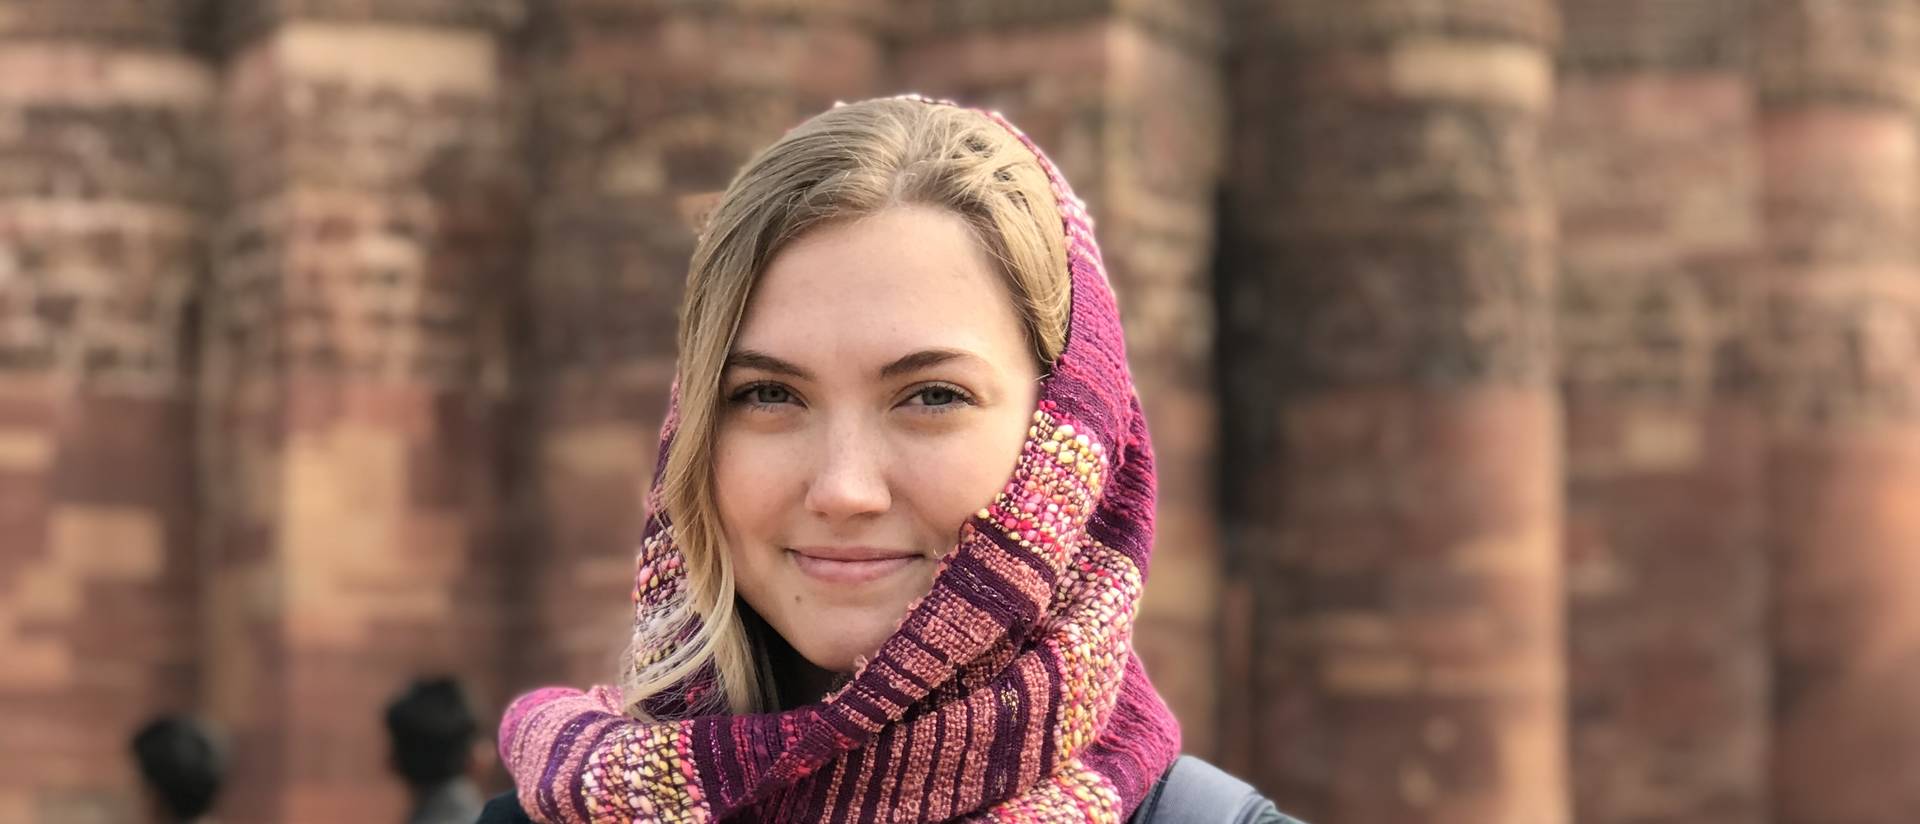 Studying abroad in India was a highlight of Megan Hansen's time as a Blugold.